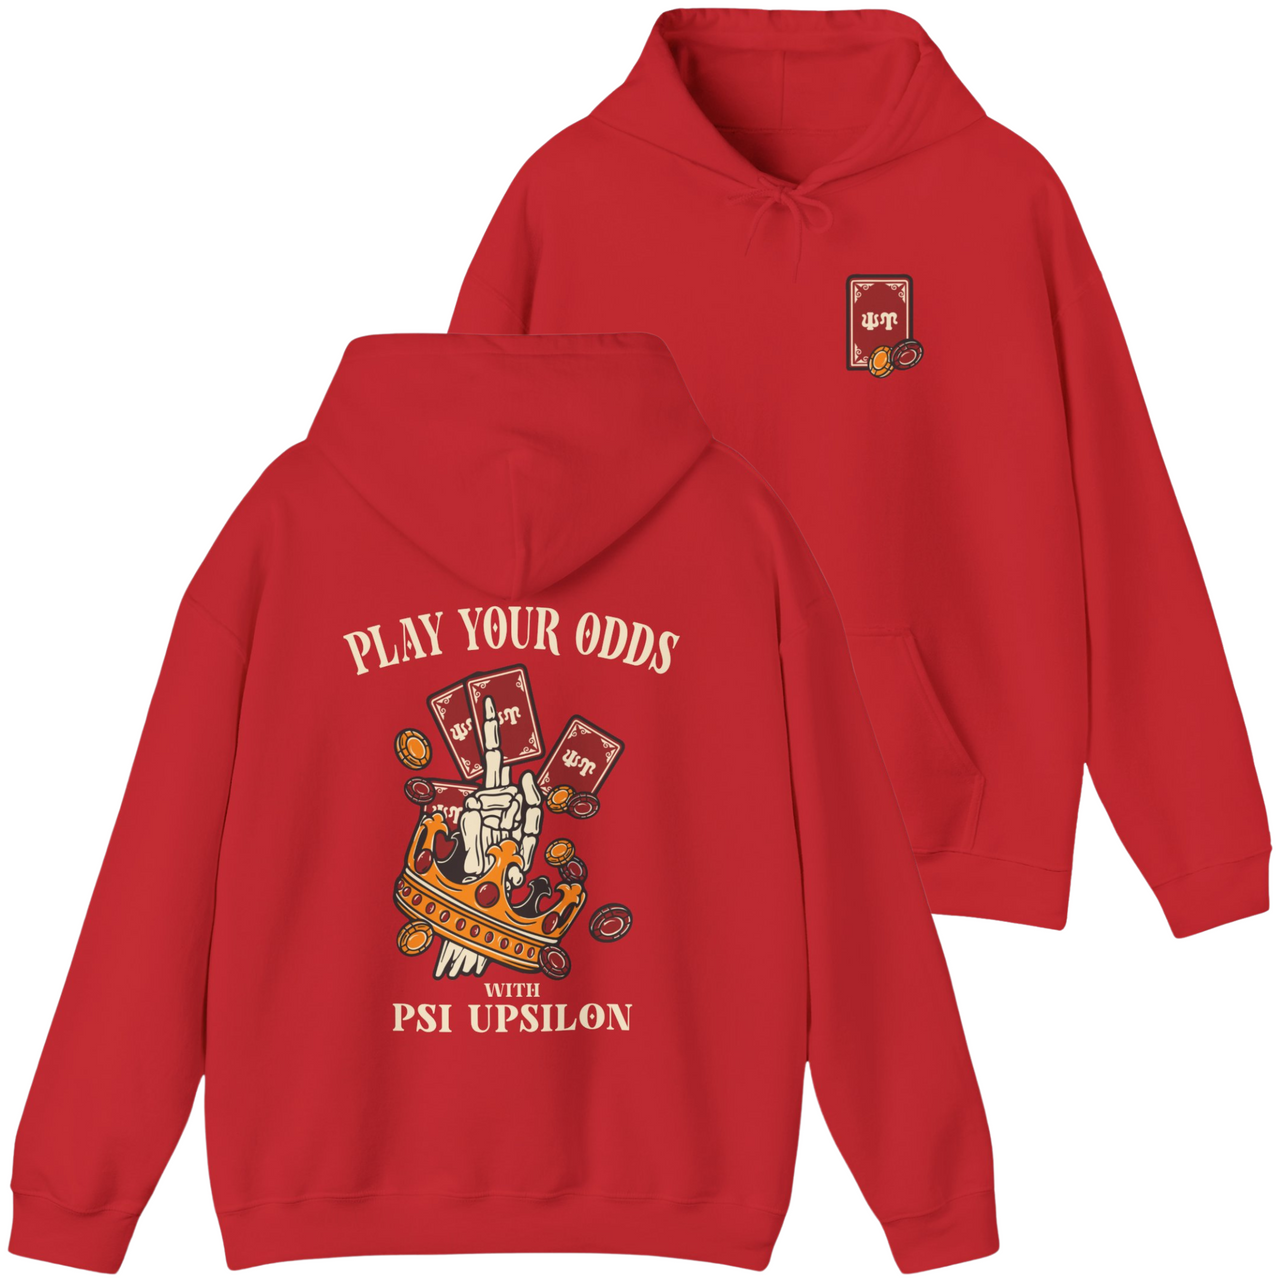 Psi Upsilon Graphic Hoodie | Play Your Odds